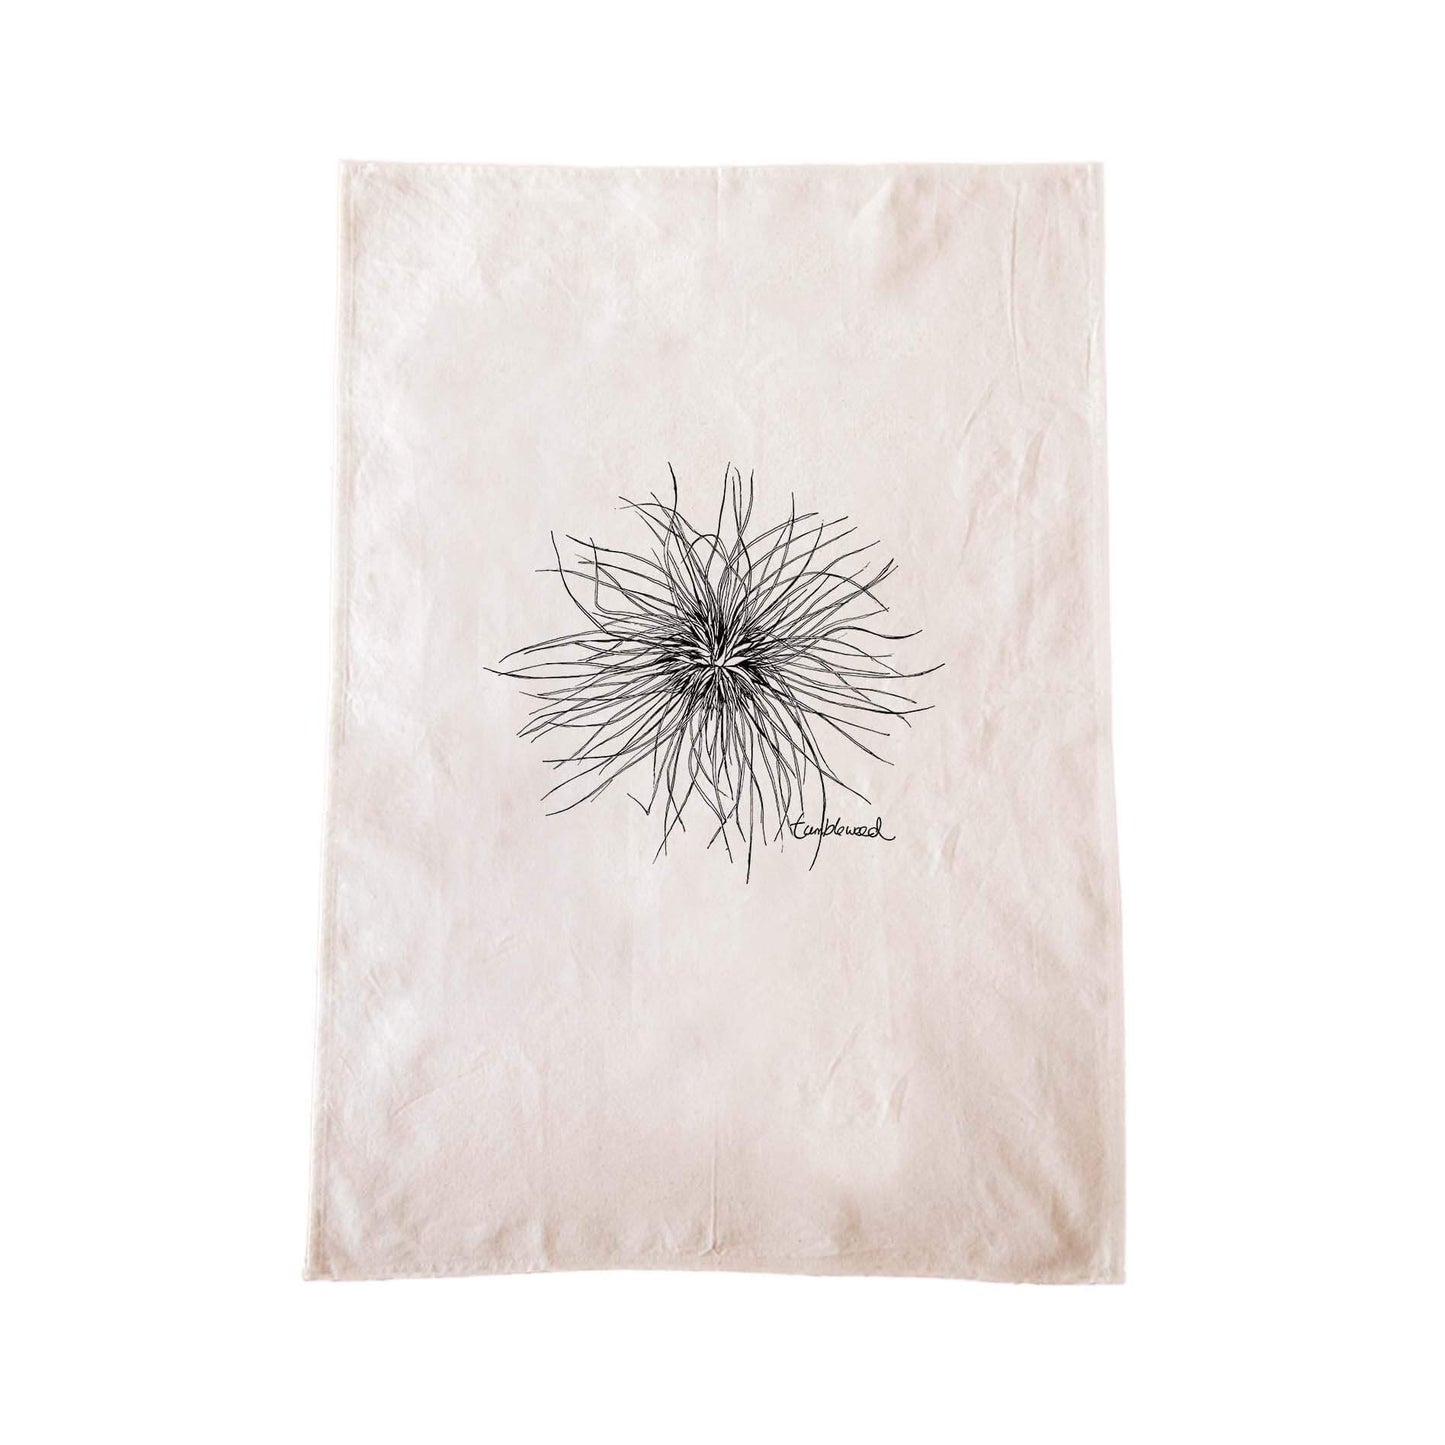 Off-white cotton tea towel with a screen printed Tumbleweed/Spinifex design.